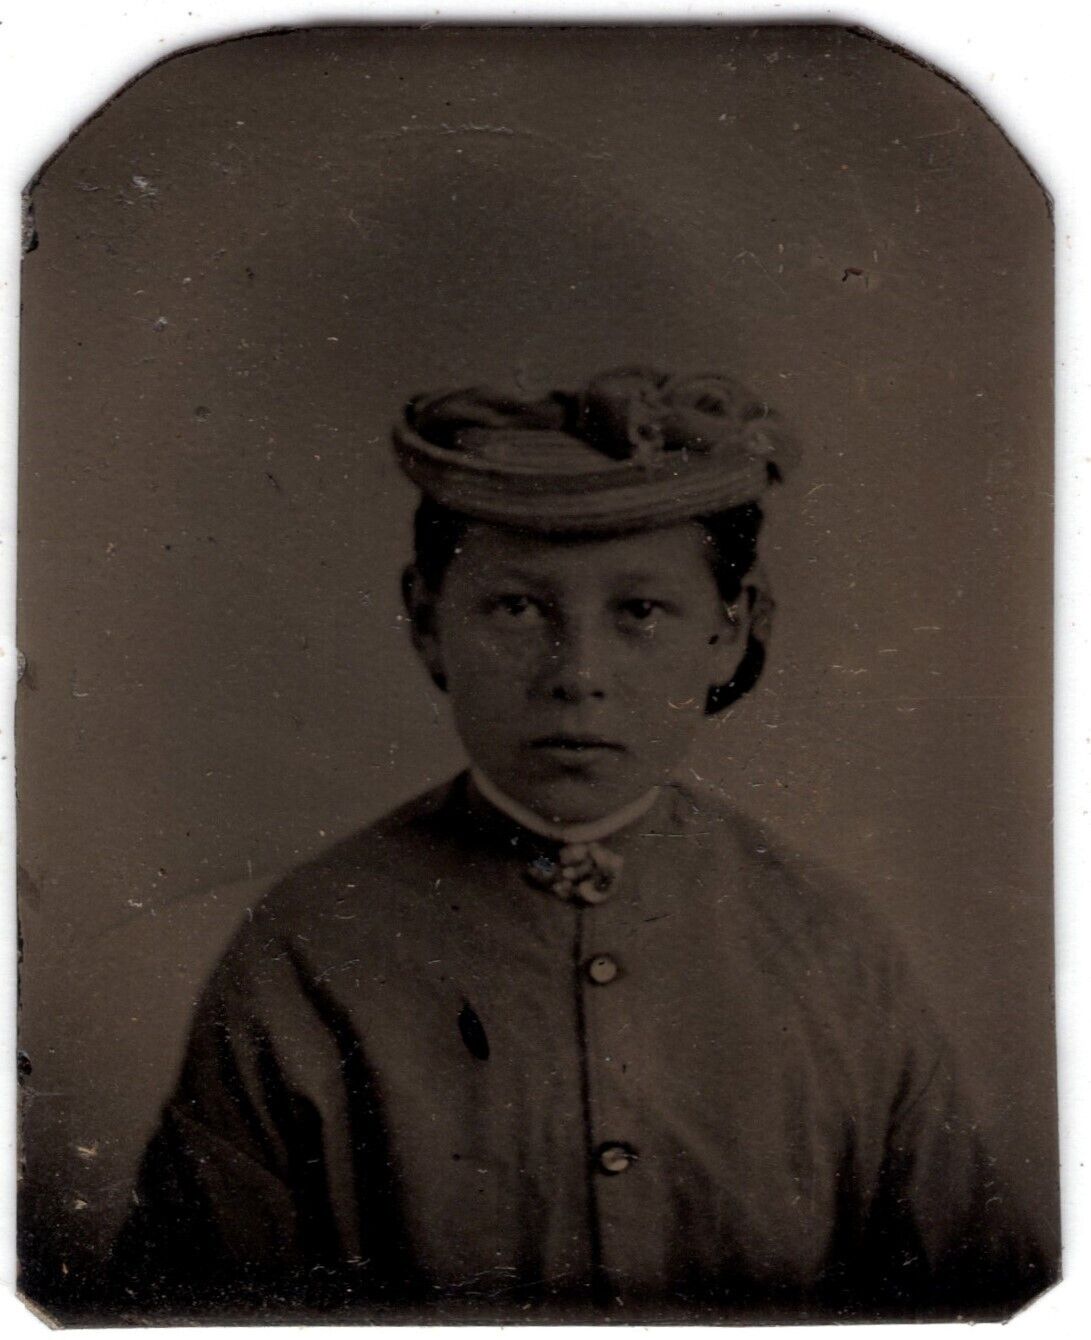 CIRCA 1870s GEM SIZE TINTYPE YOUNG GIRL WEARING HAT